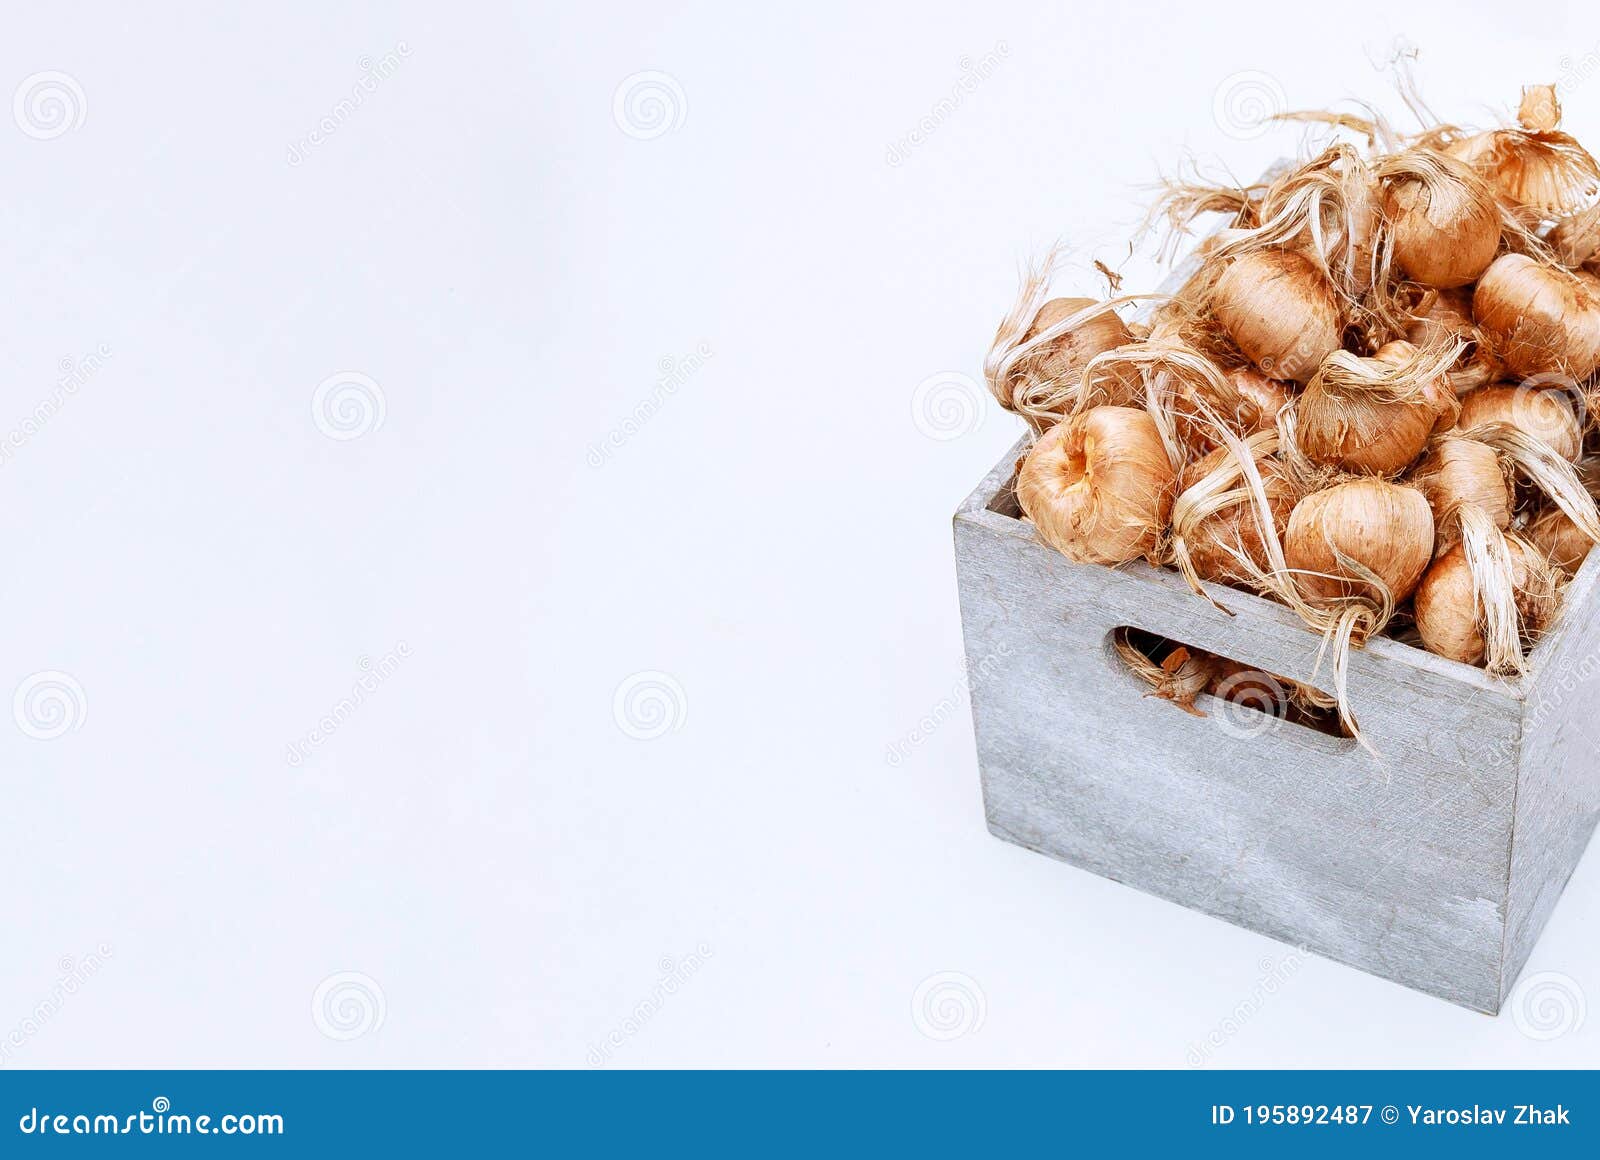 saffron bulbs in a box on a white background. crocus sativus bulbs are prepared for planting. copy space